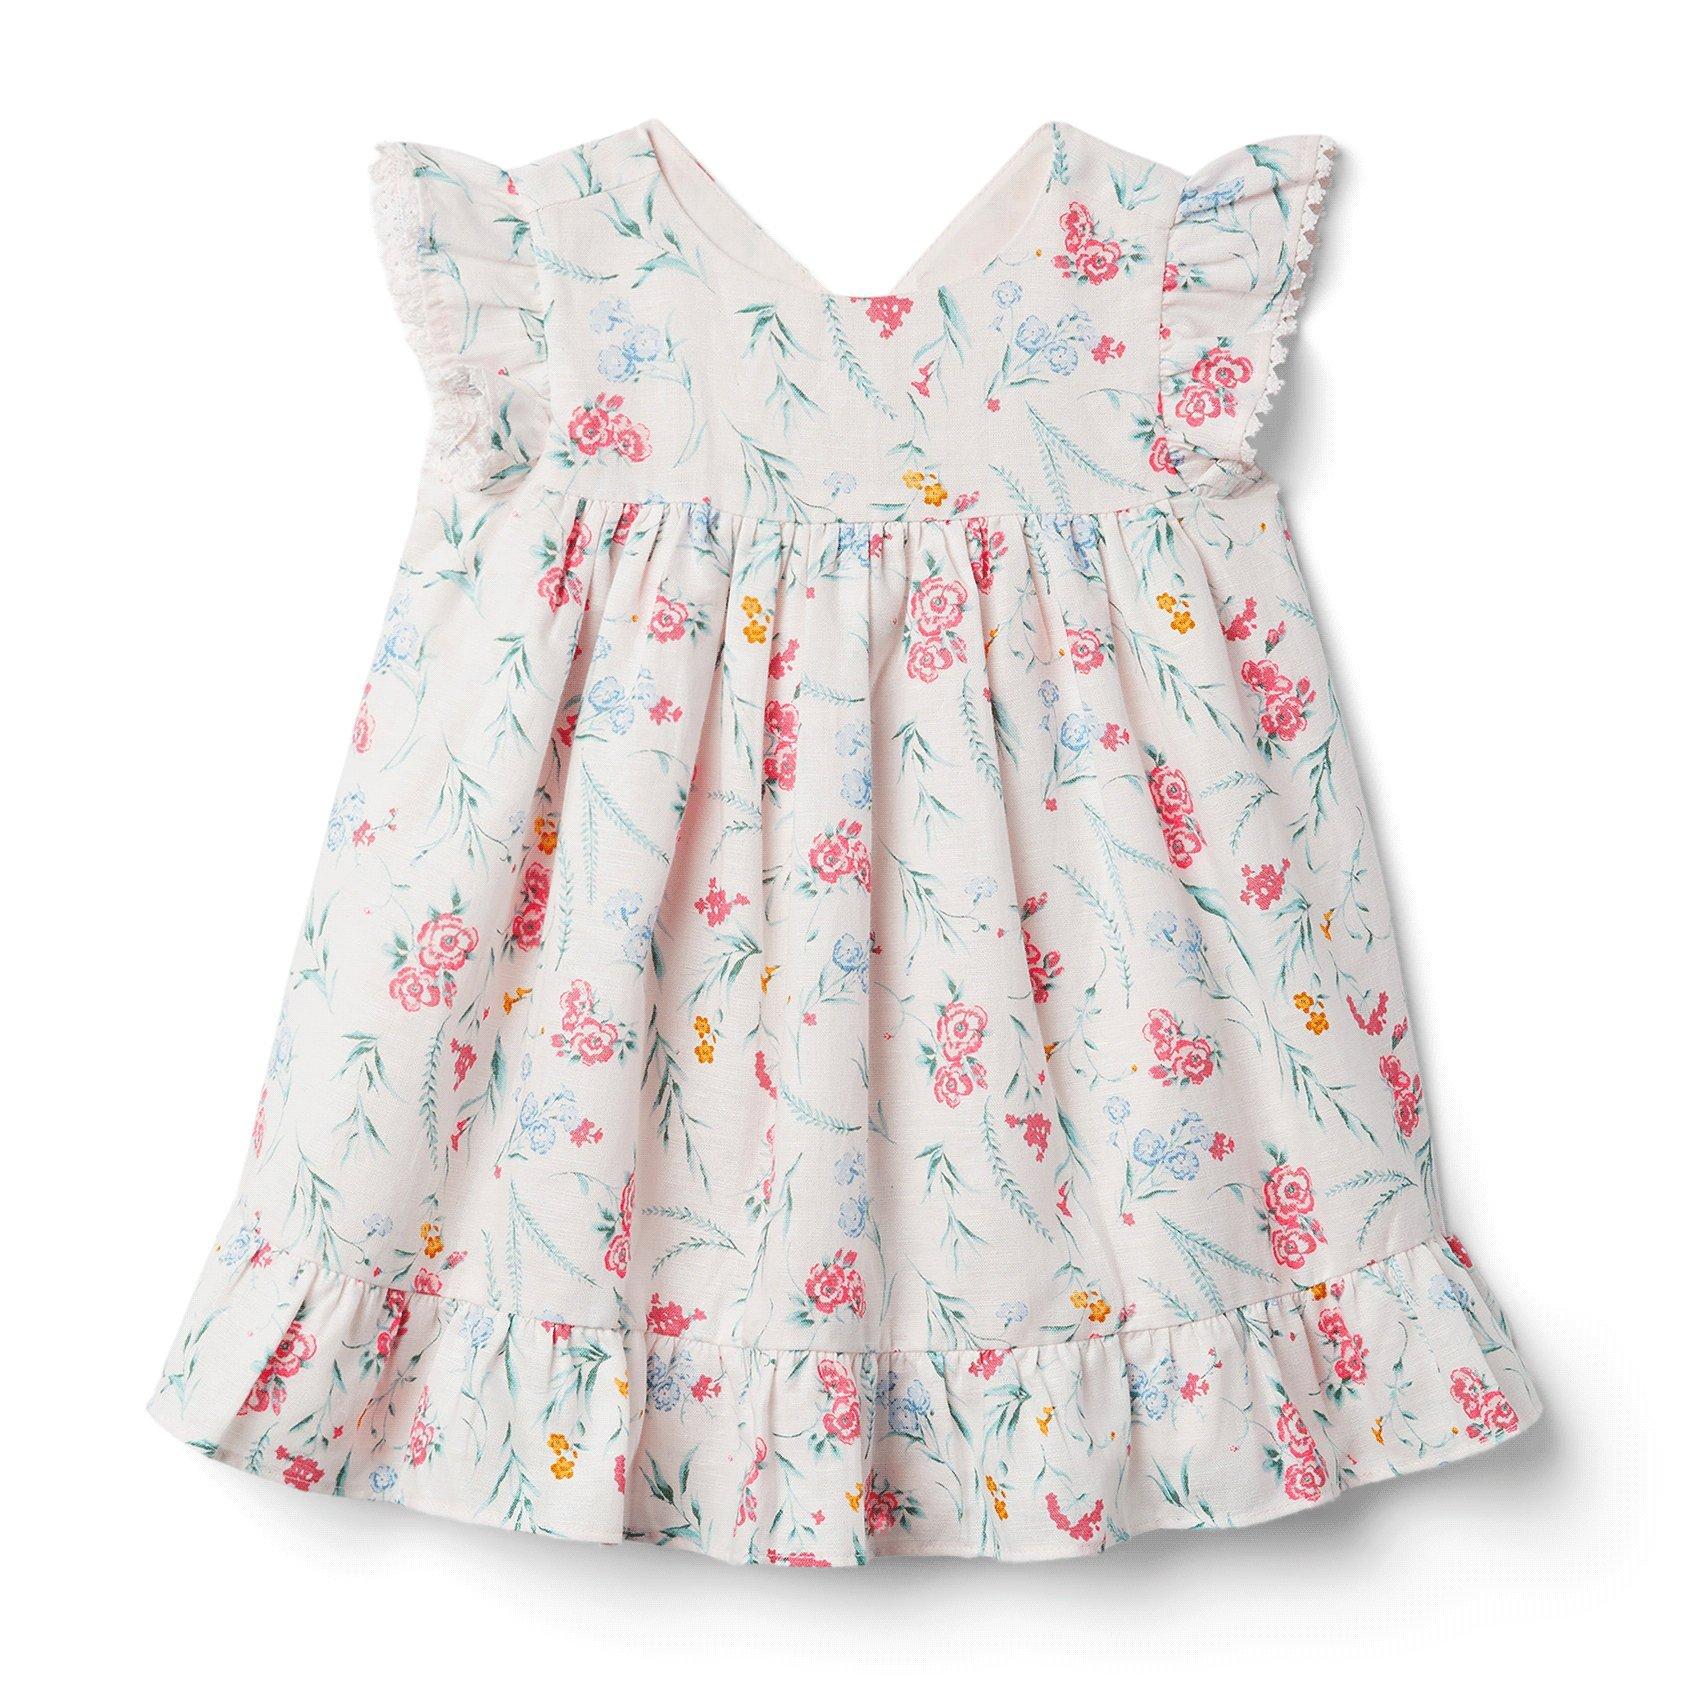 Newborn Delicacy Floral Baby Floral Dress by Janie and Jack